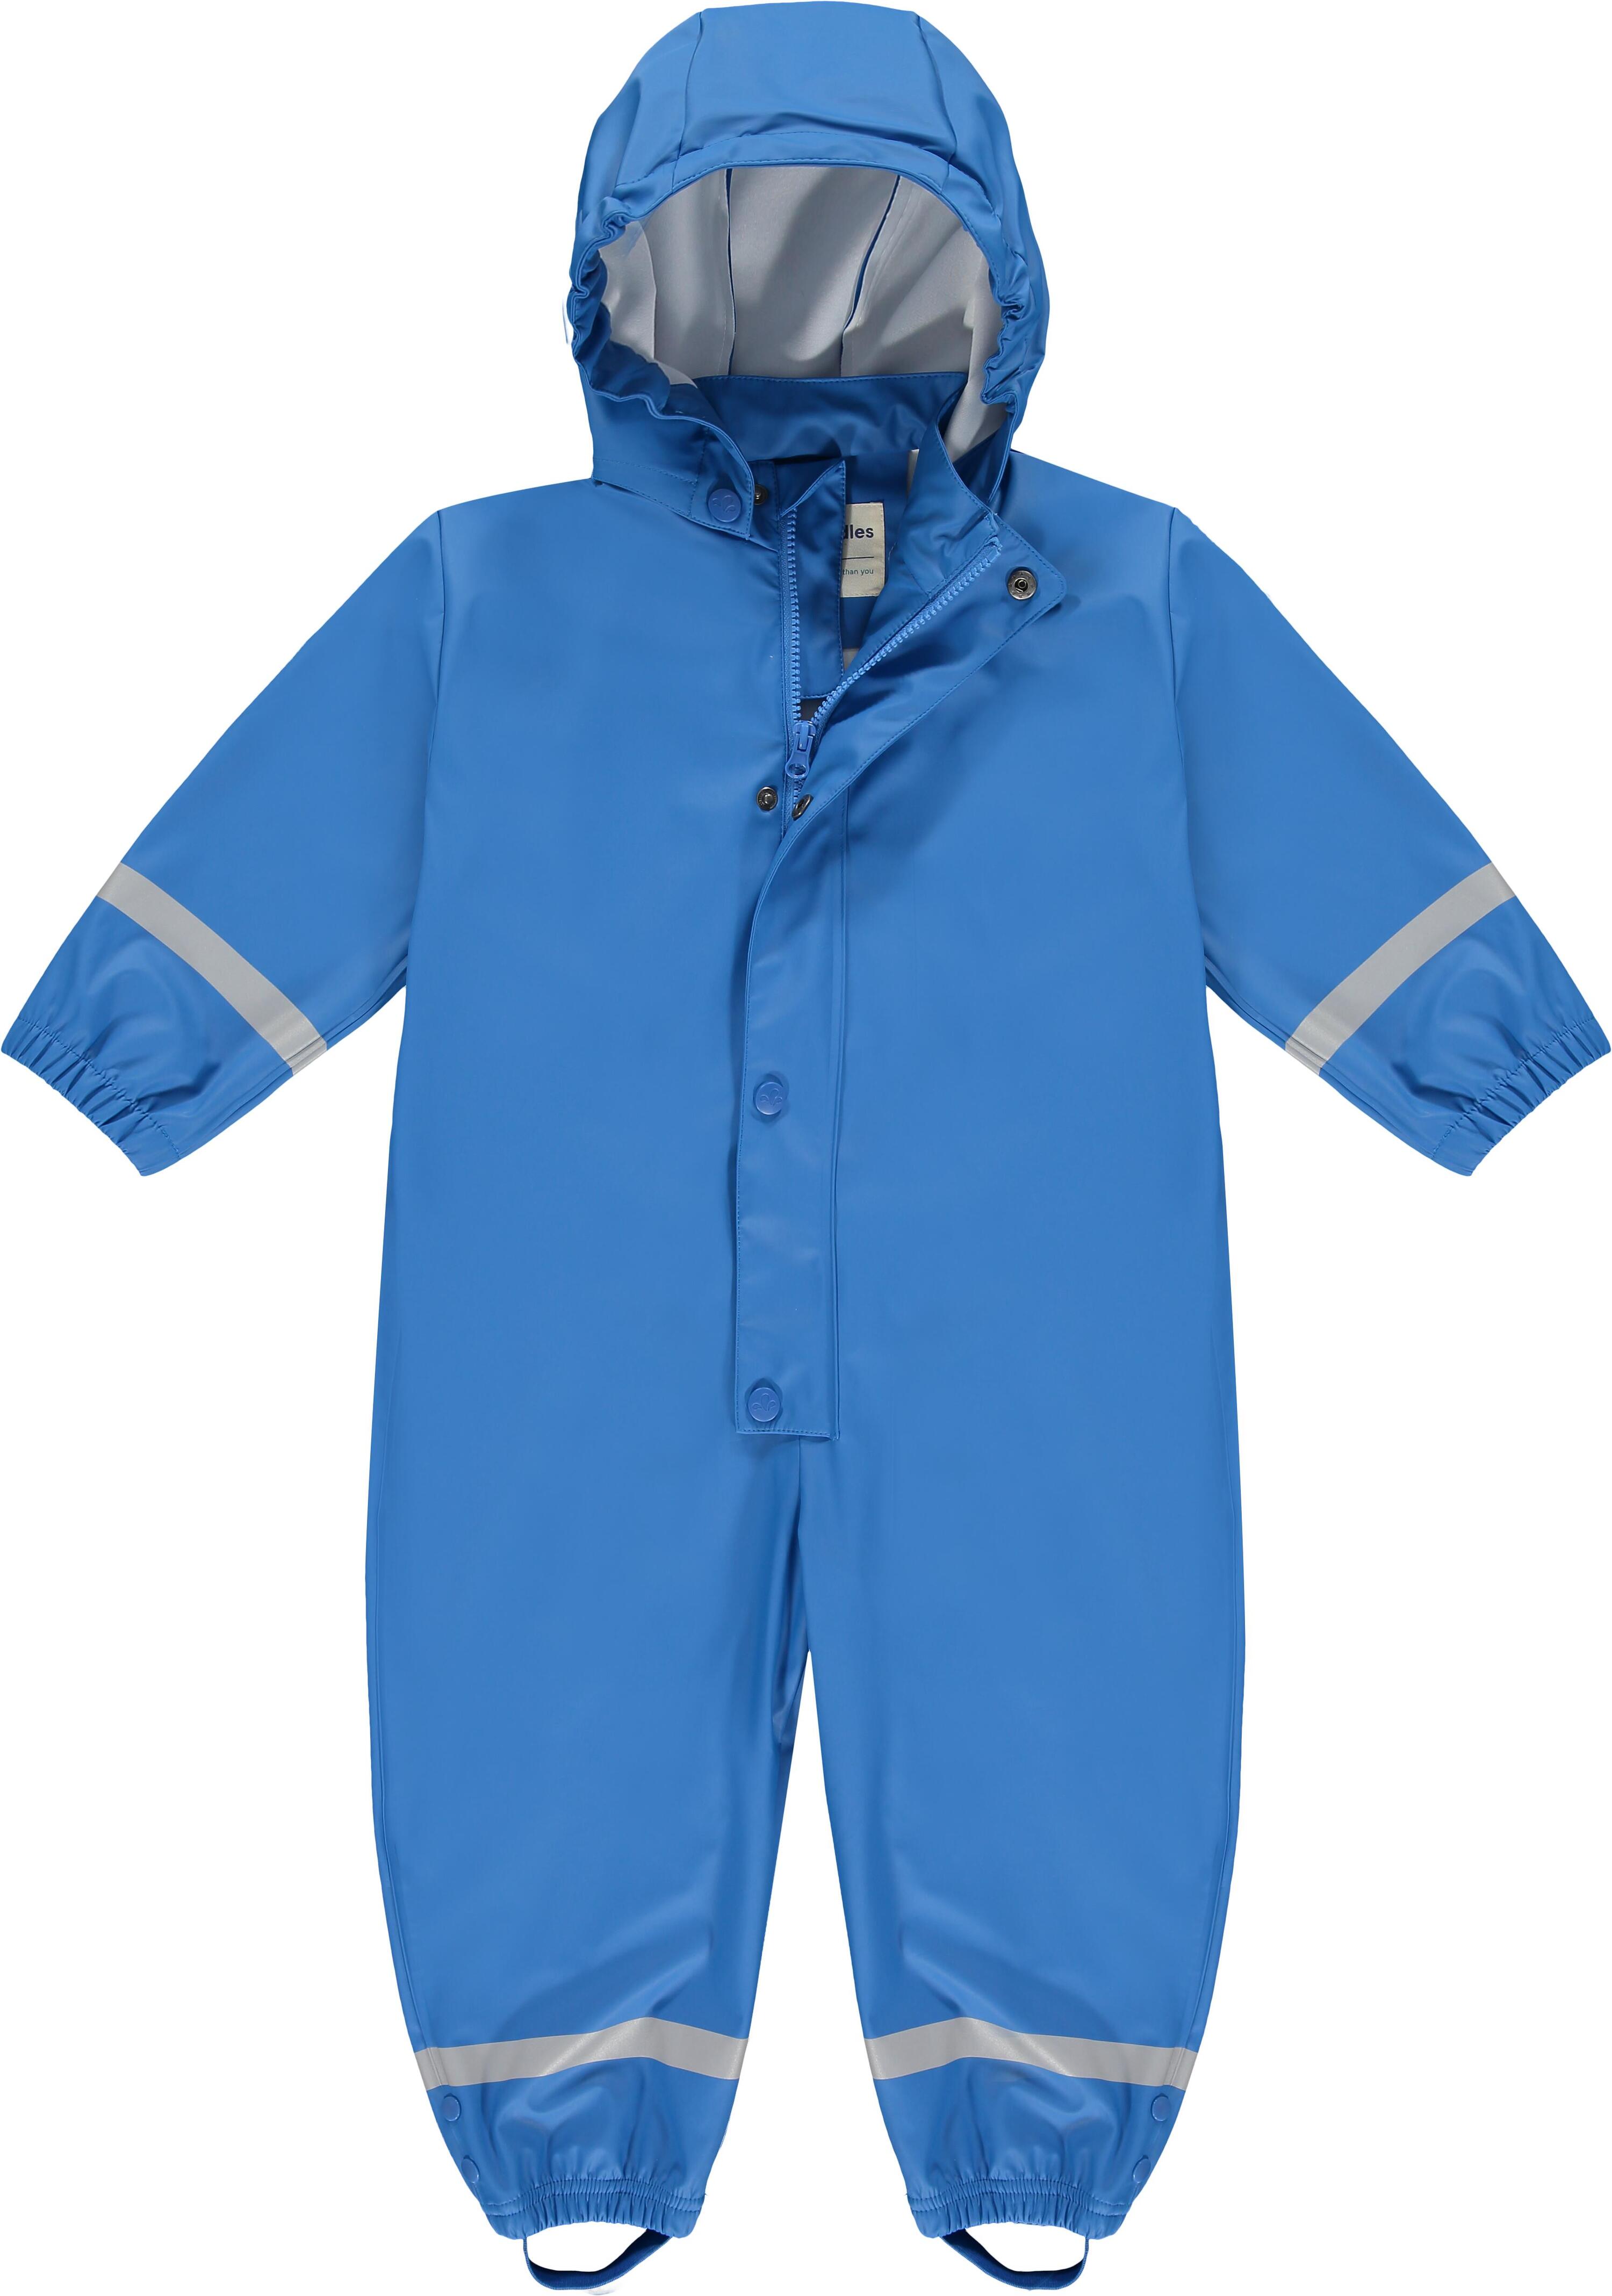 MUDDY PUDDLES Kids Blue Waterproof All in One Recycled